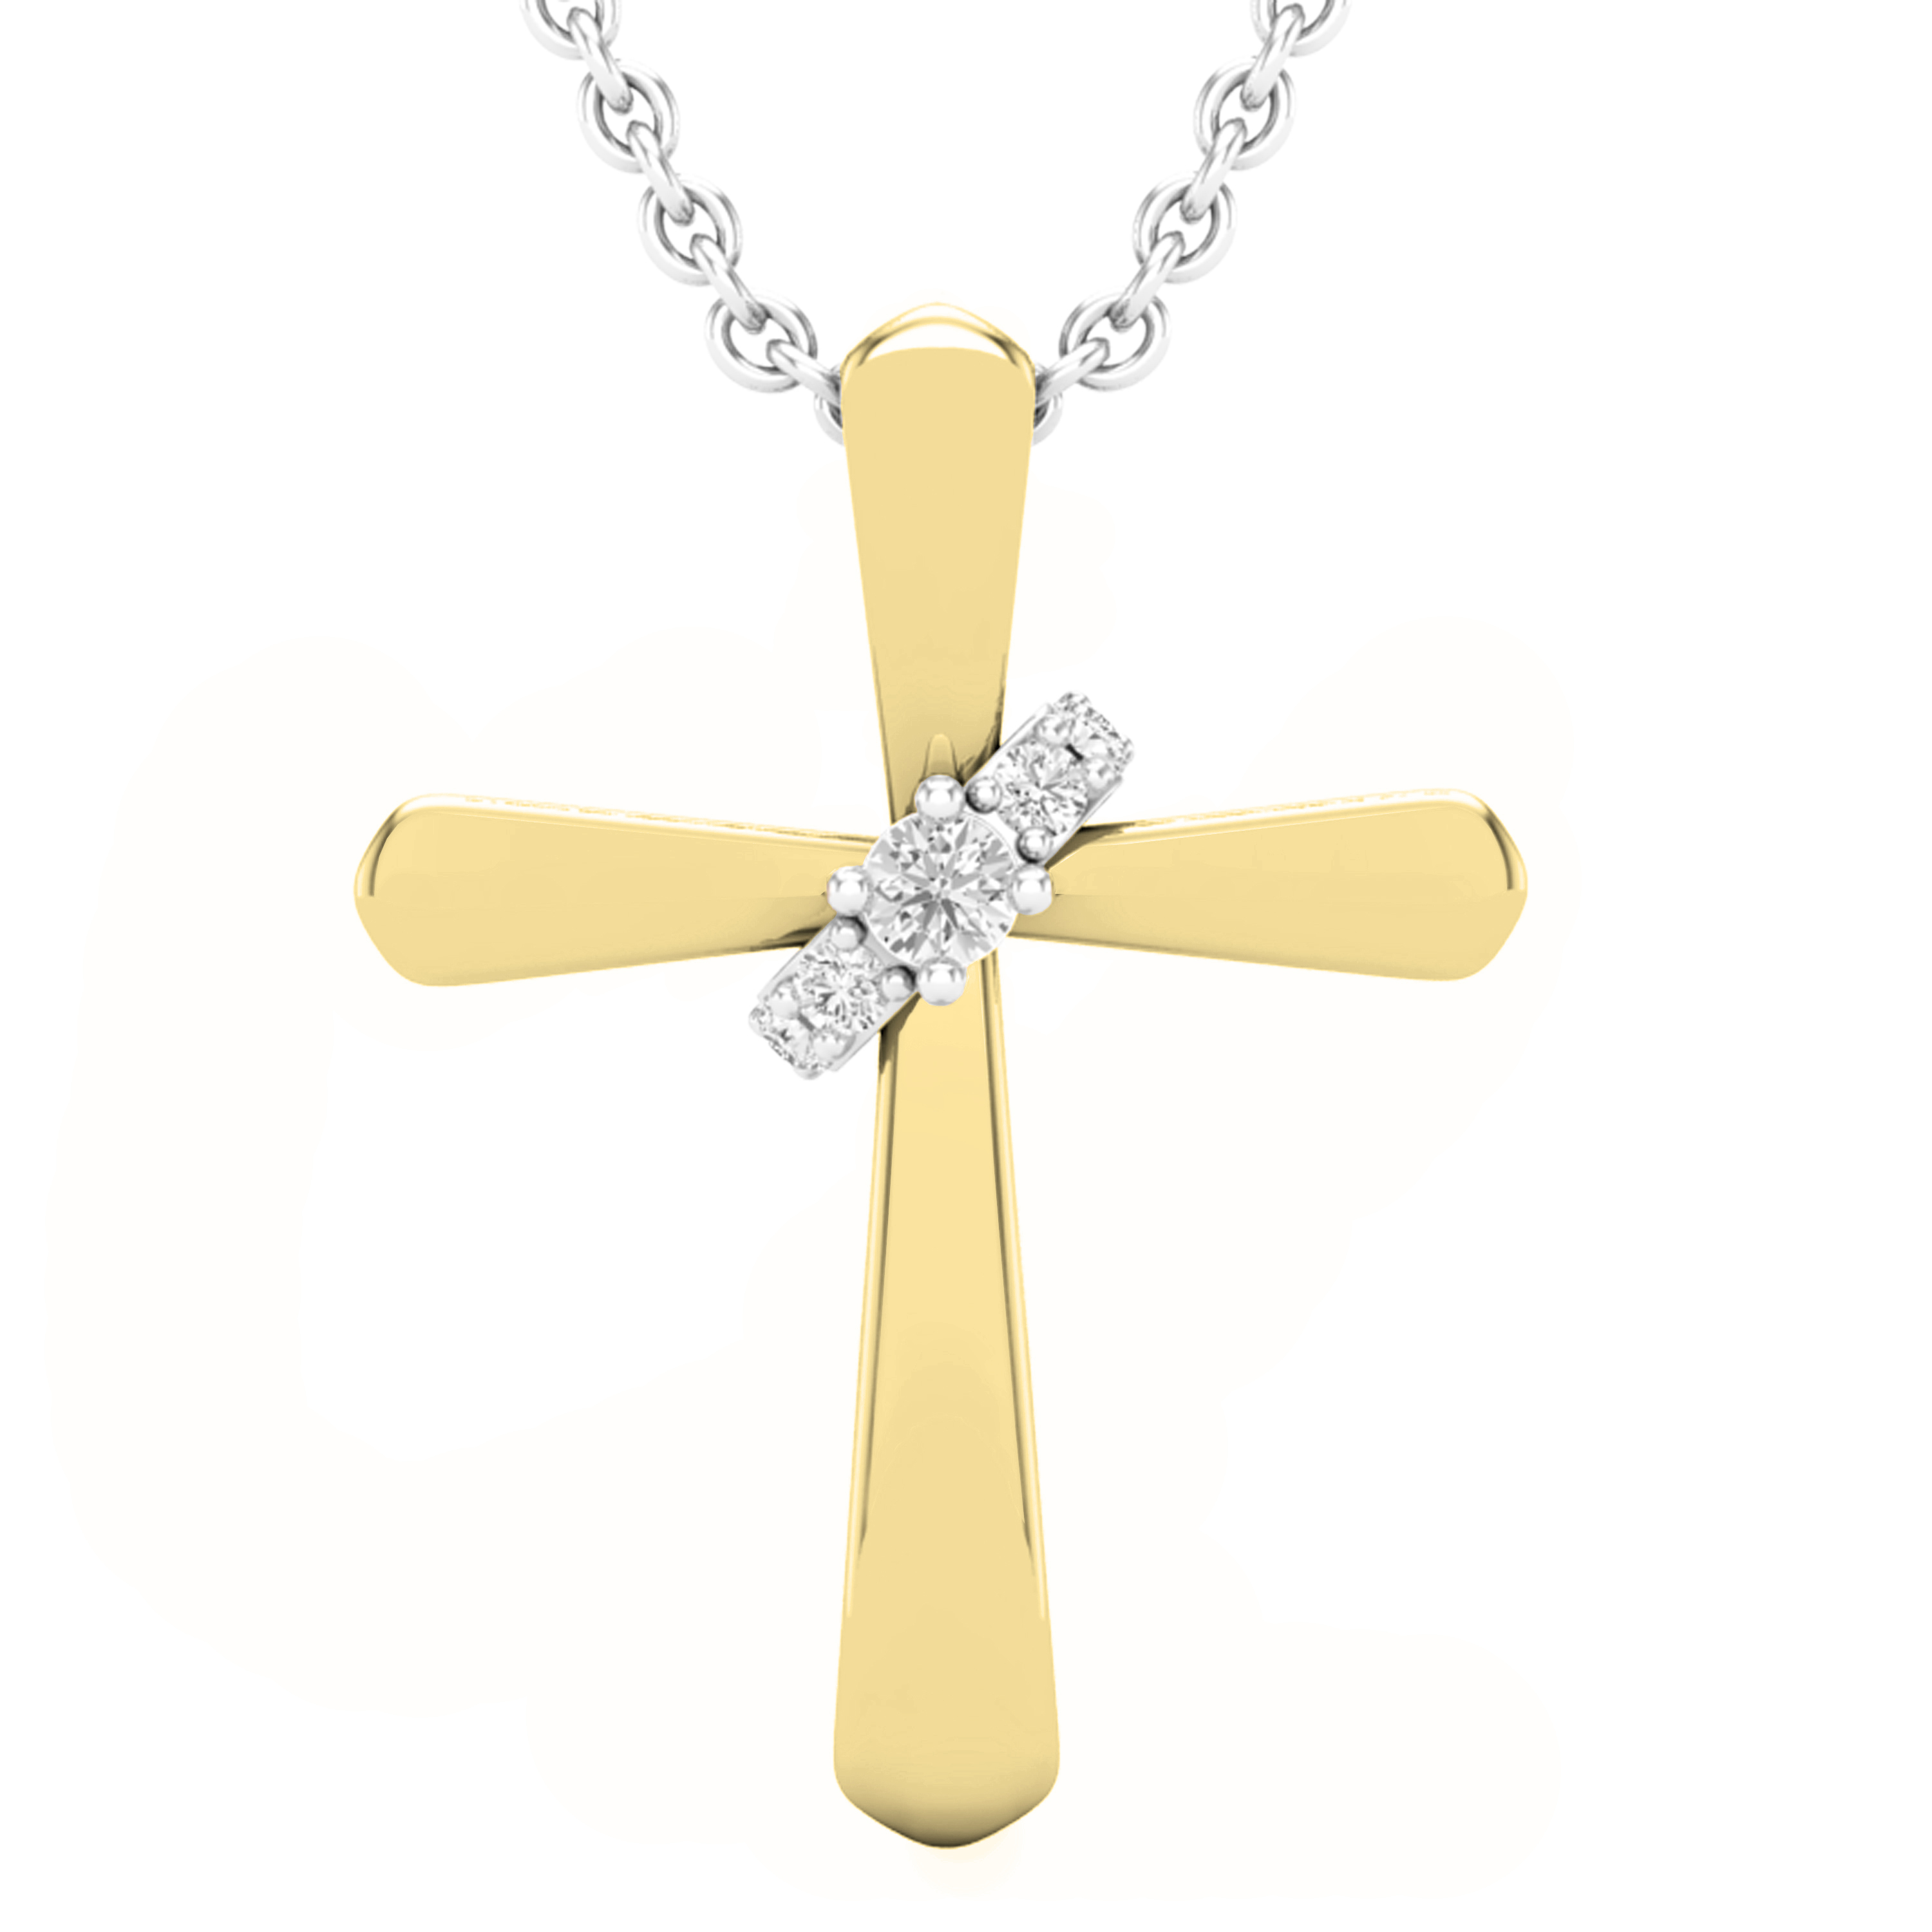 Stainless Steel Cross Pendant Necklace for Mens Boys 3mm Chain 22 inch -  Buy Online - 18327654